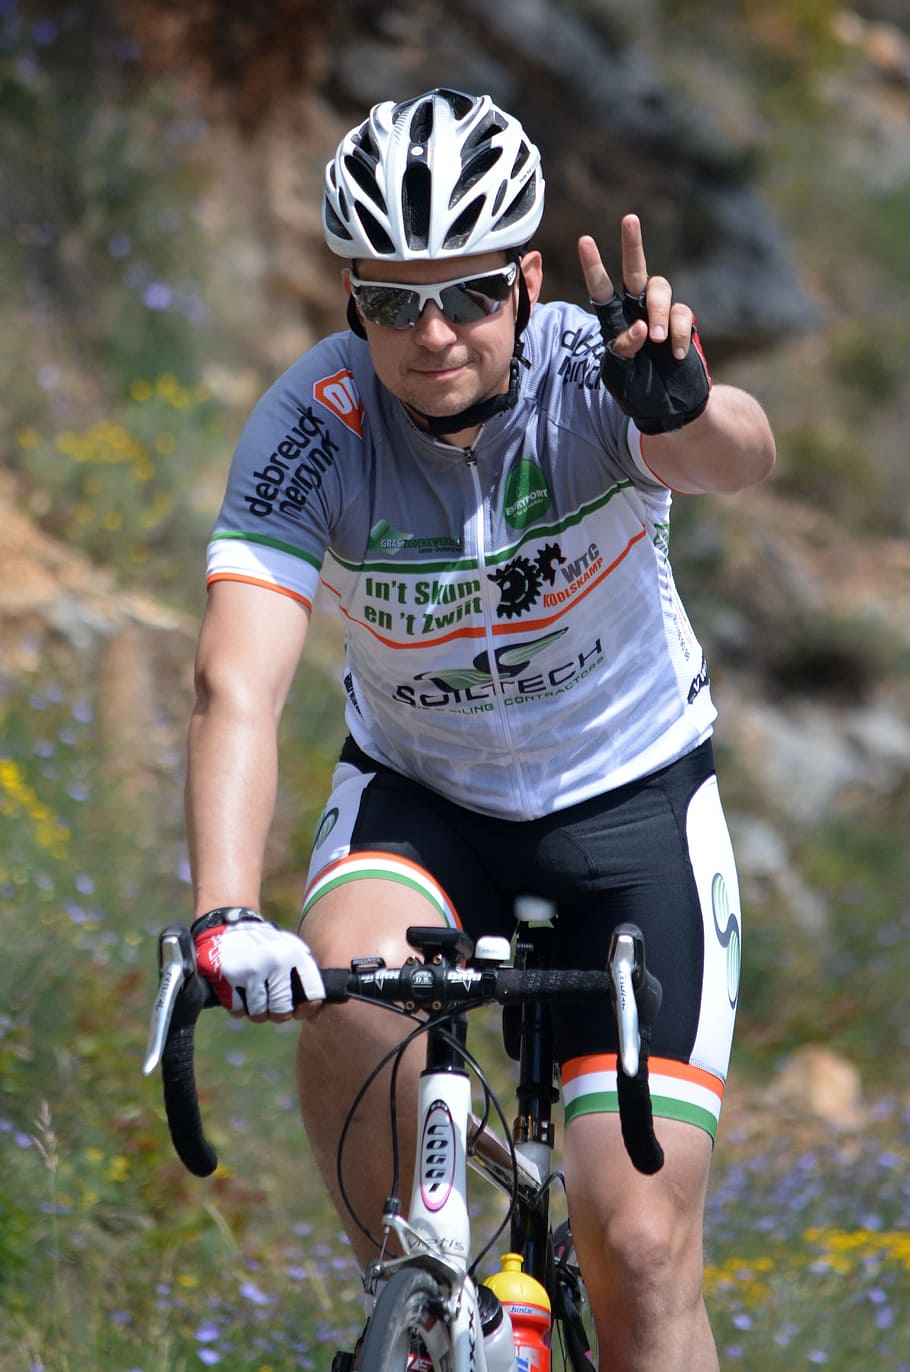 man, riding, road bike, peace hand sign, cyclist, sports, cycling, people, professional road bicycle racer, bicycle